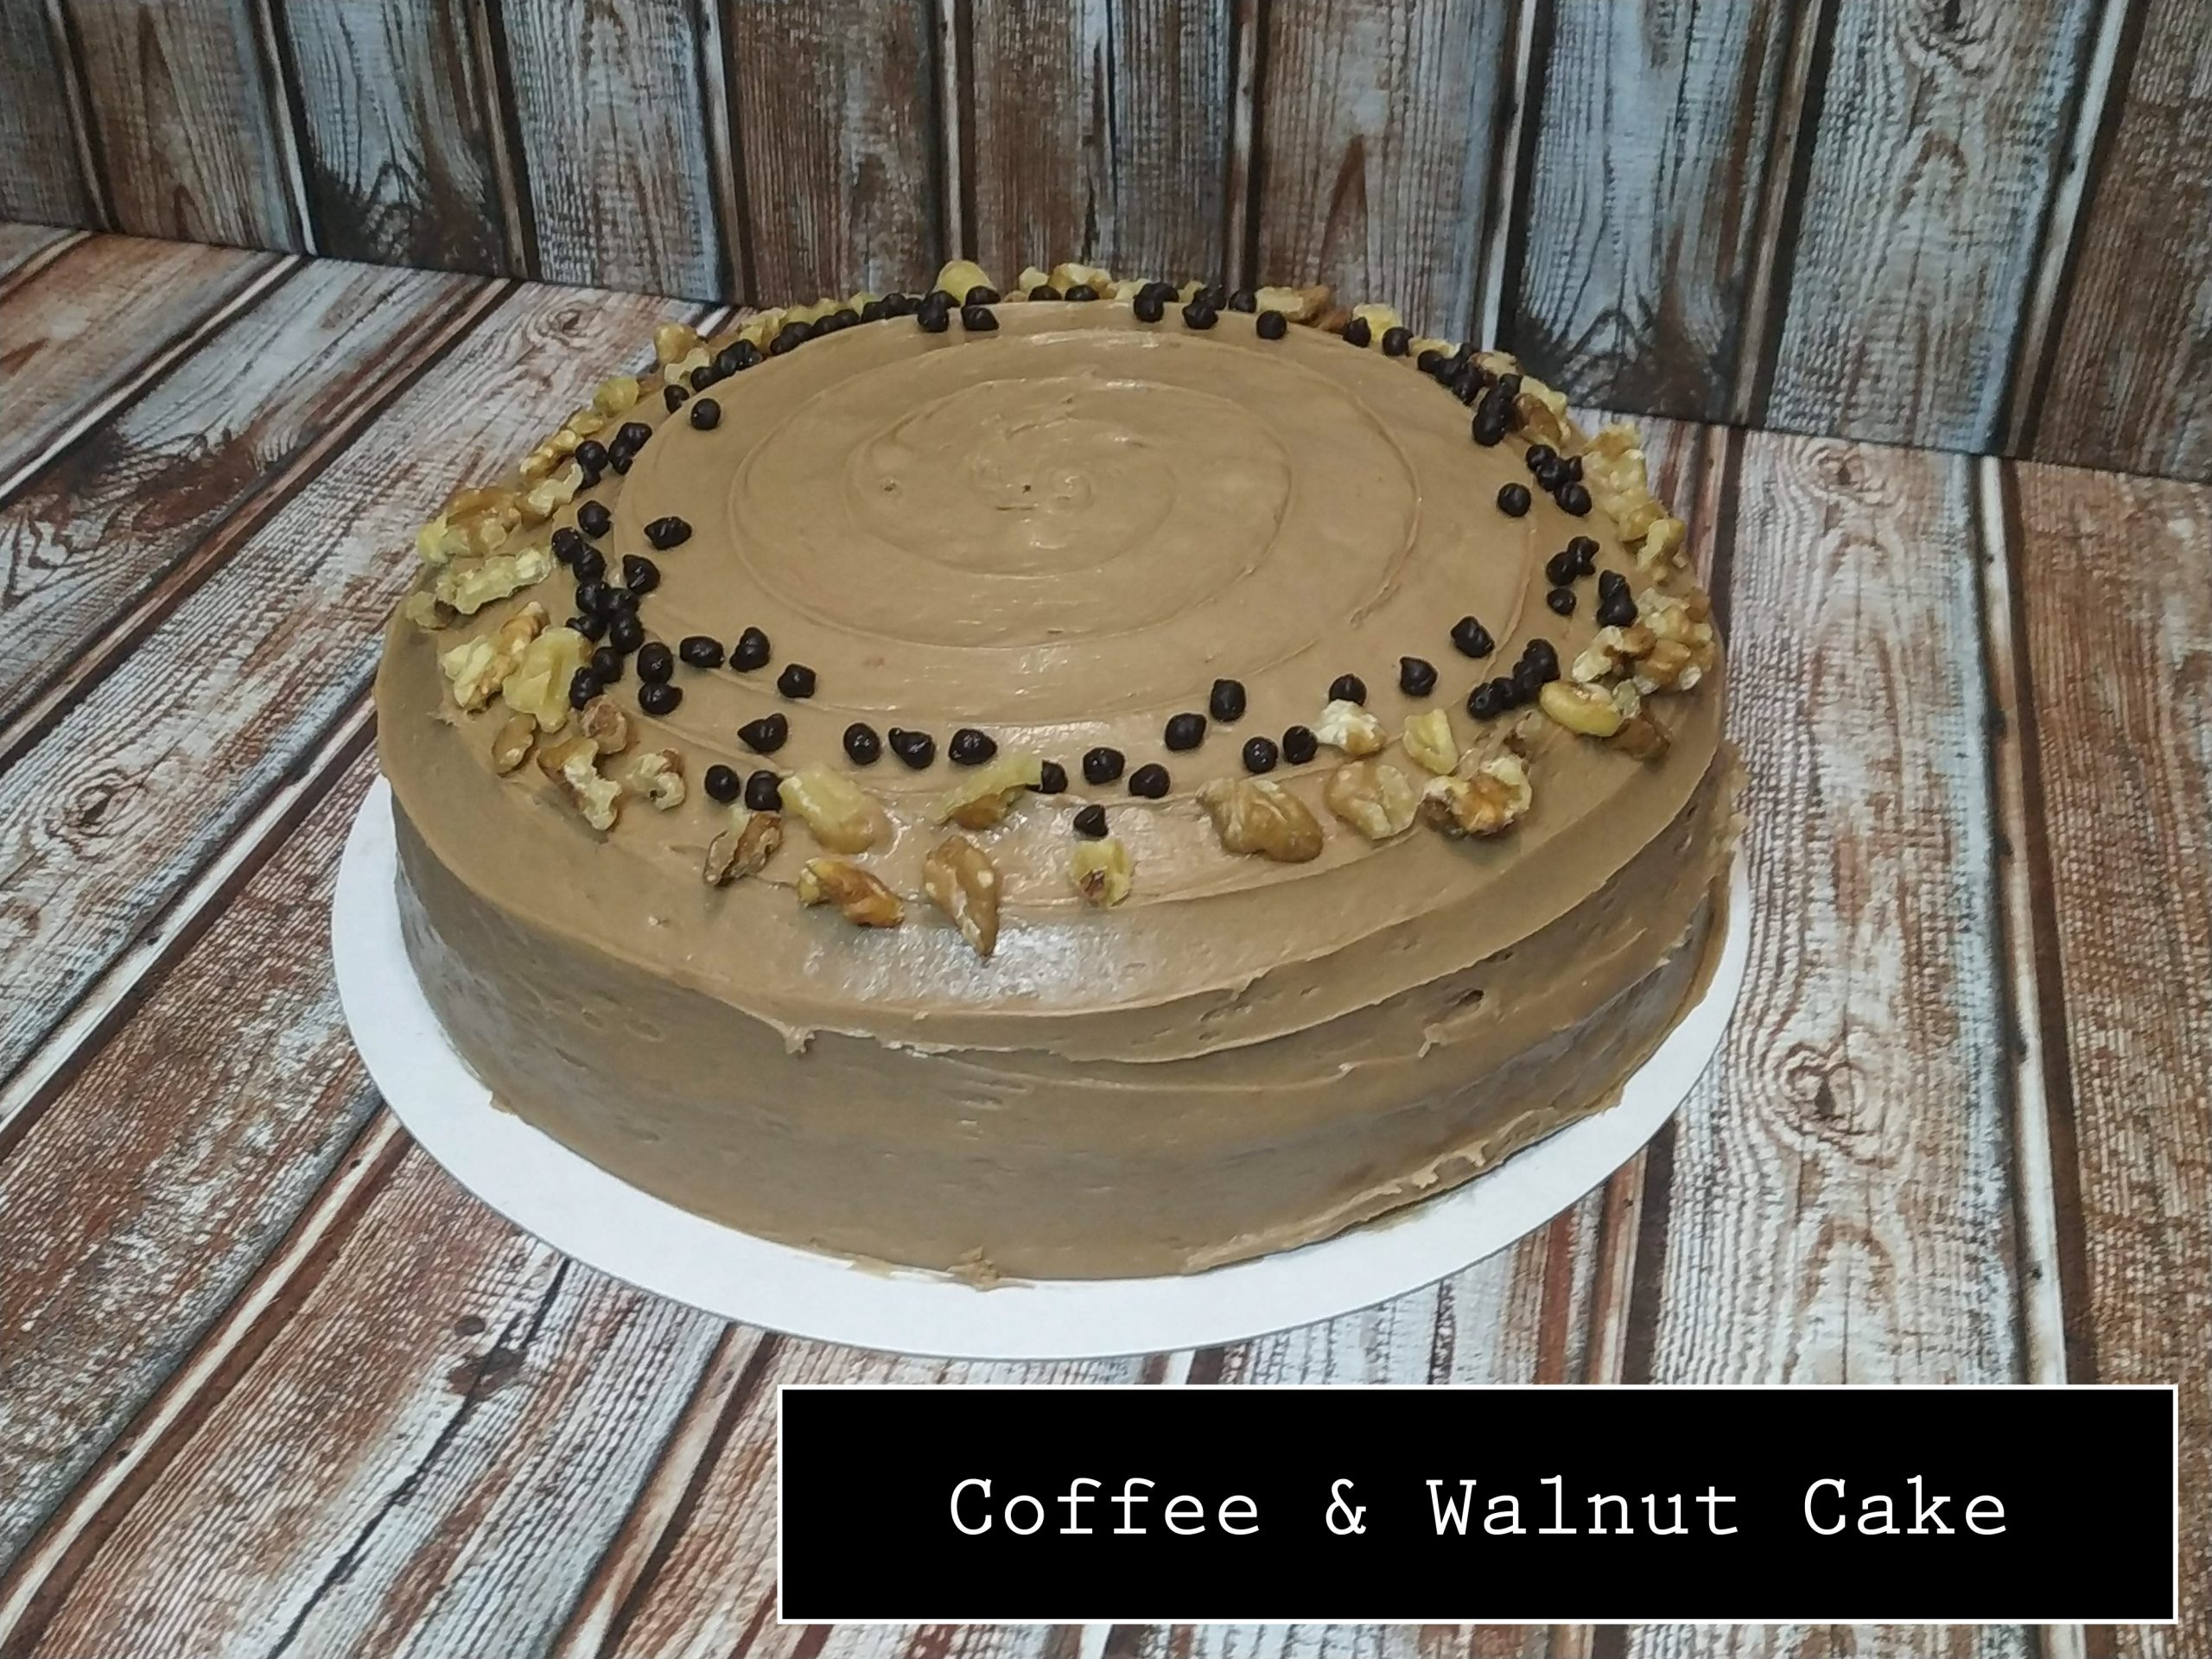 Coffee & Walnut Cake by Sandwich in the Square